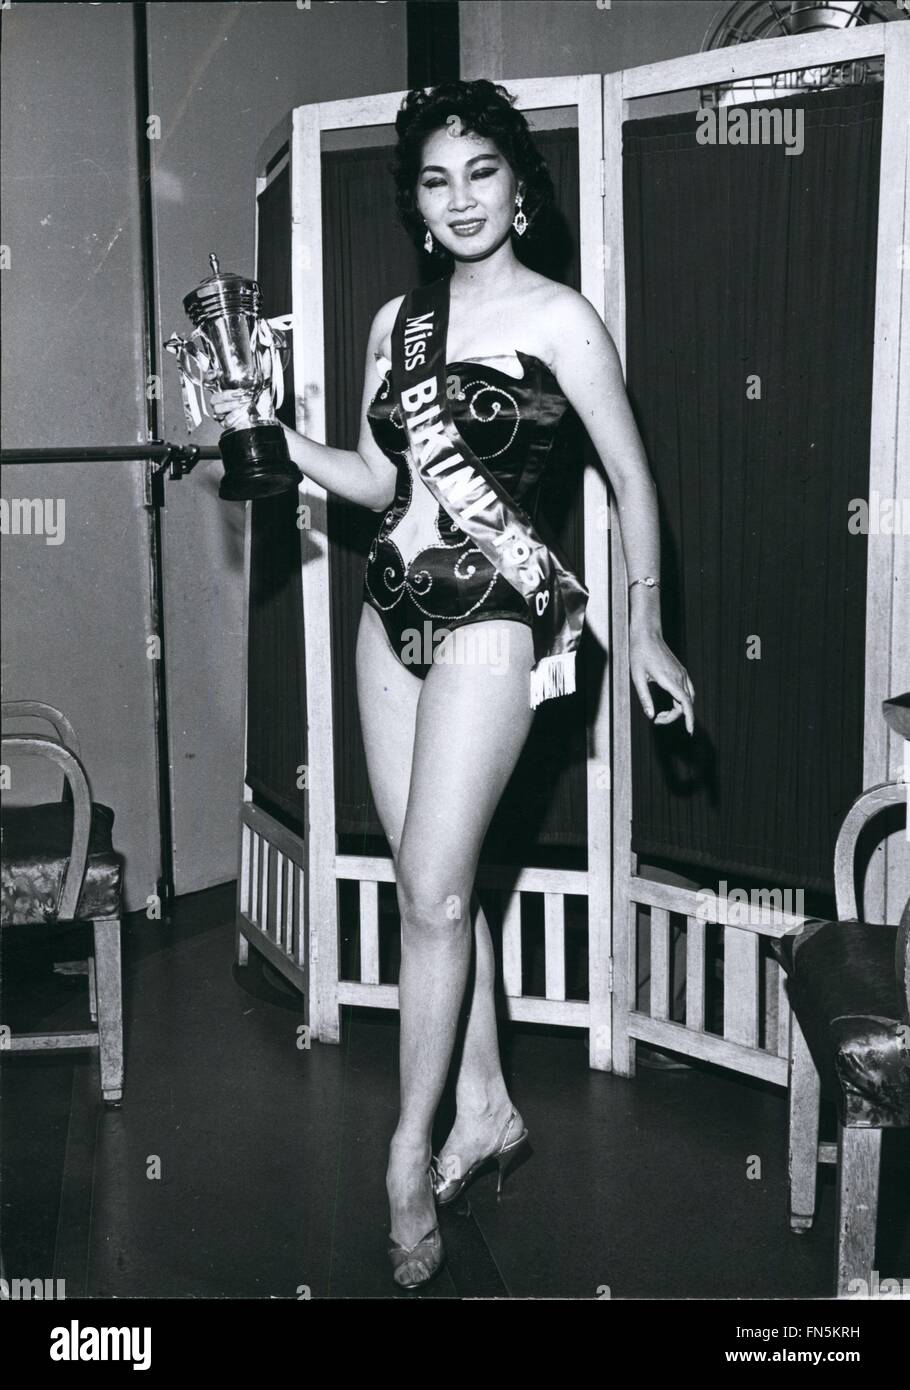 1959 - Singapore's Miss Bikini 1959: Miss Daisy Szeto age 22, was the winner of the Miss Bikini Contest held in Singapore. She will reign during 1959. Her vital statistics are 36-23-35, and she was born in Canton, China. Her bathing suit has a built in air vent in the front covered by a net 'window' giving a view of her tummy. © Keystone Pictures USA/ZUMAPRESS.com/Alamy Live News Stock Photo